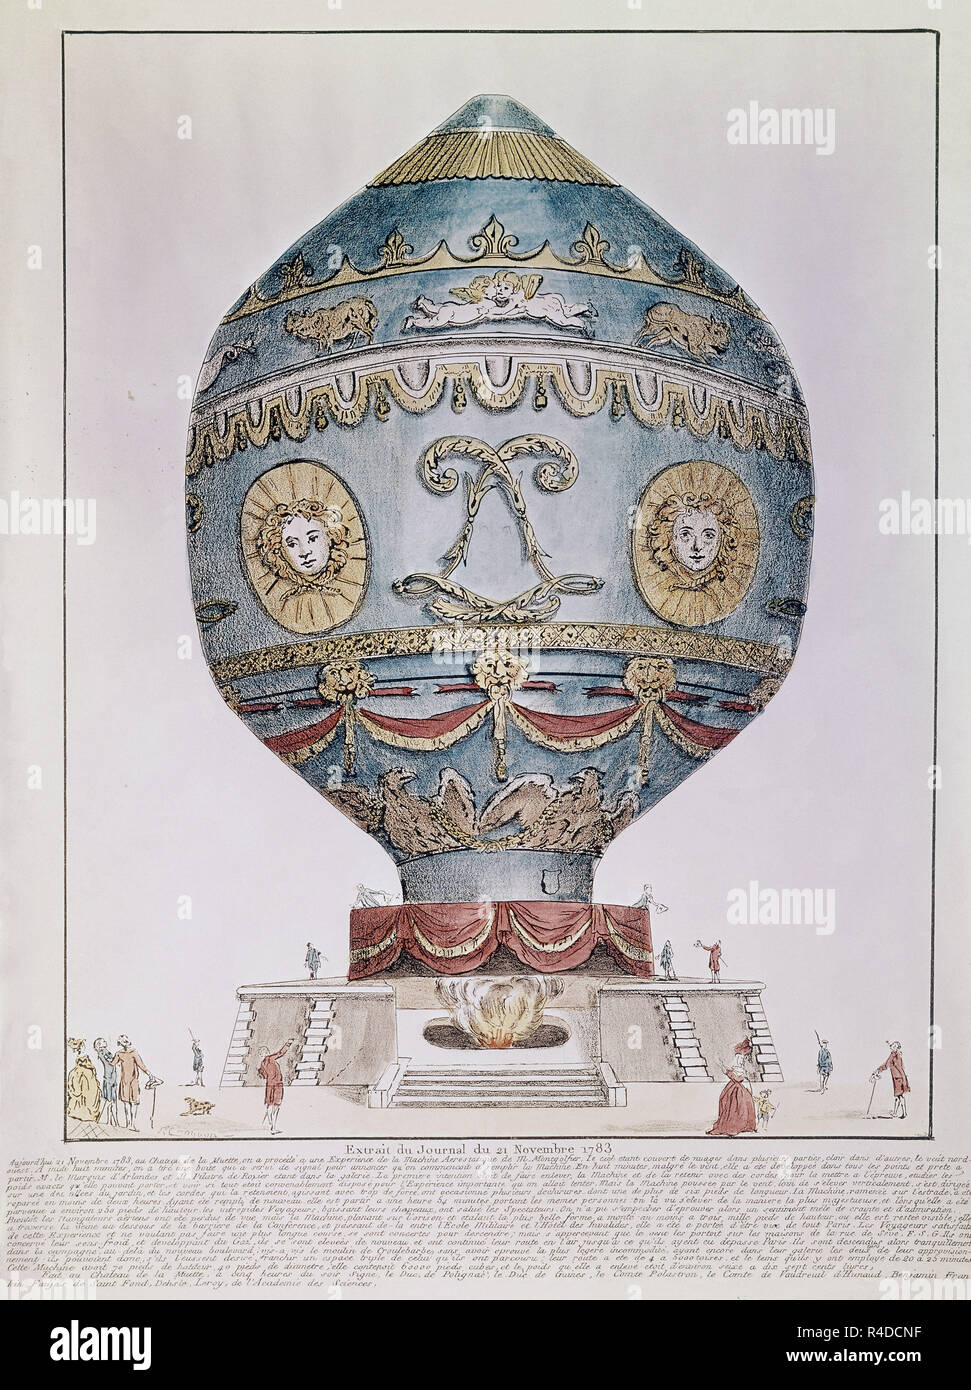 AEROSTATIC BALLOON, INVENTED BY MONTGOLFIER BROTHERS. 70 FEET HIGH, 40 FEET DIAMETER. JOURNAL 11/21/1783. Author: MONTGOLFIER JOSE Y ETIENNE. Location: PRIVATE COLLECTION. MADRID. SPAIN. Stock Photo